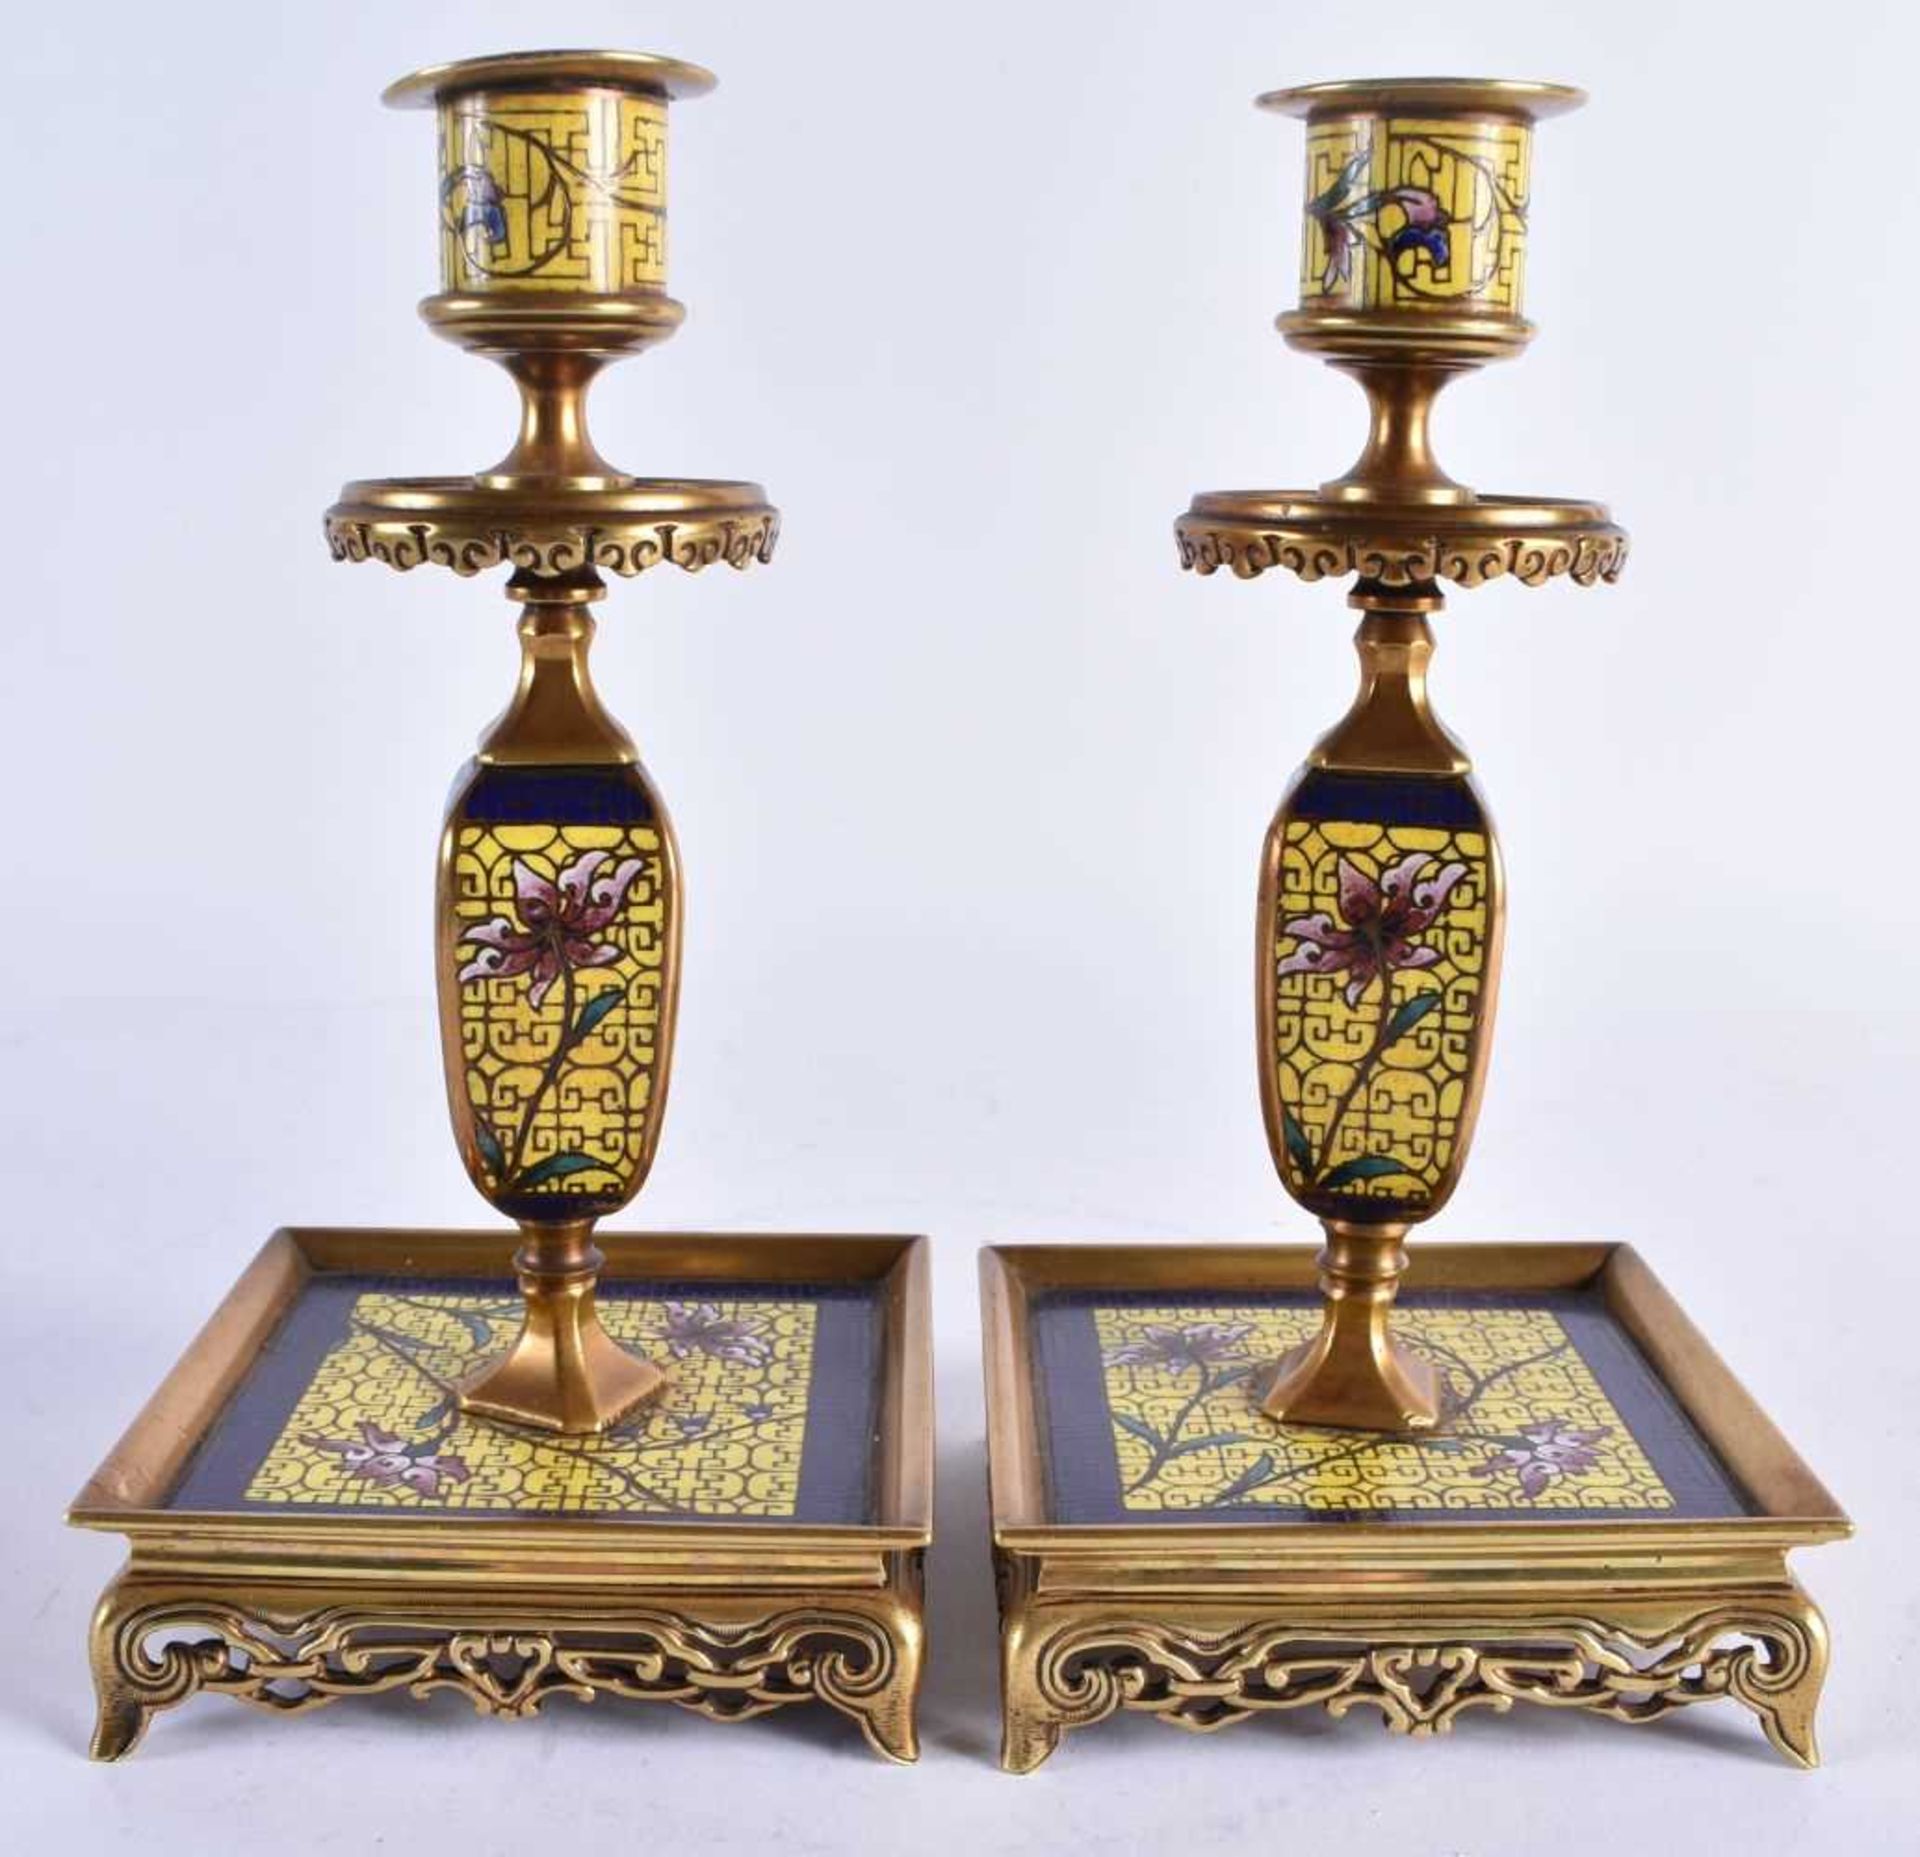 A FINE 19TH CENTURY FRENCH BRONZE AND CHAMPLEVE ENAMEL DESK GARNITURE in the manner of - Image 10 of 14